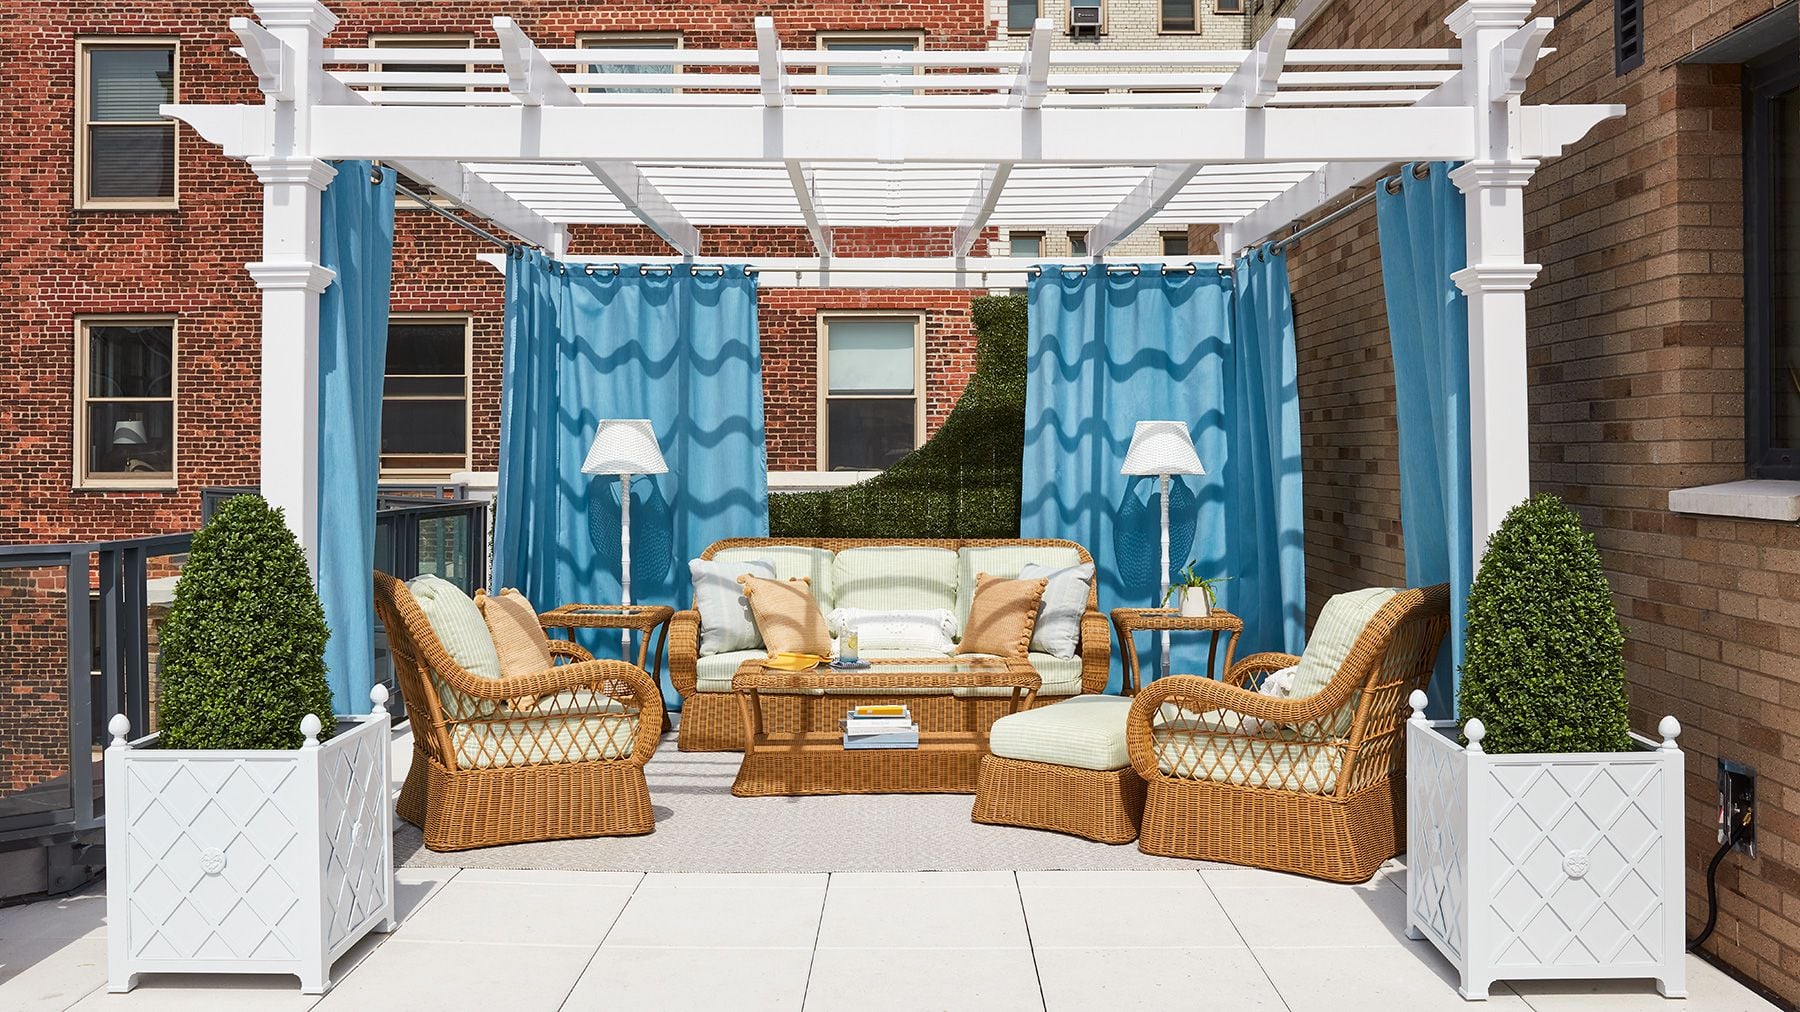 As if the stunning interiors weren't enough, the 2020 Real Simple Home also boasts this incredible rooftop terrace.